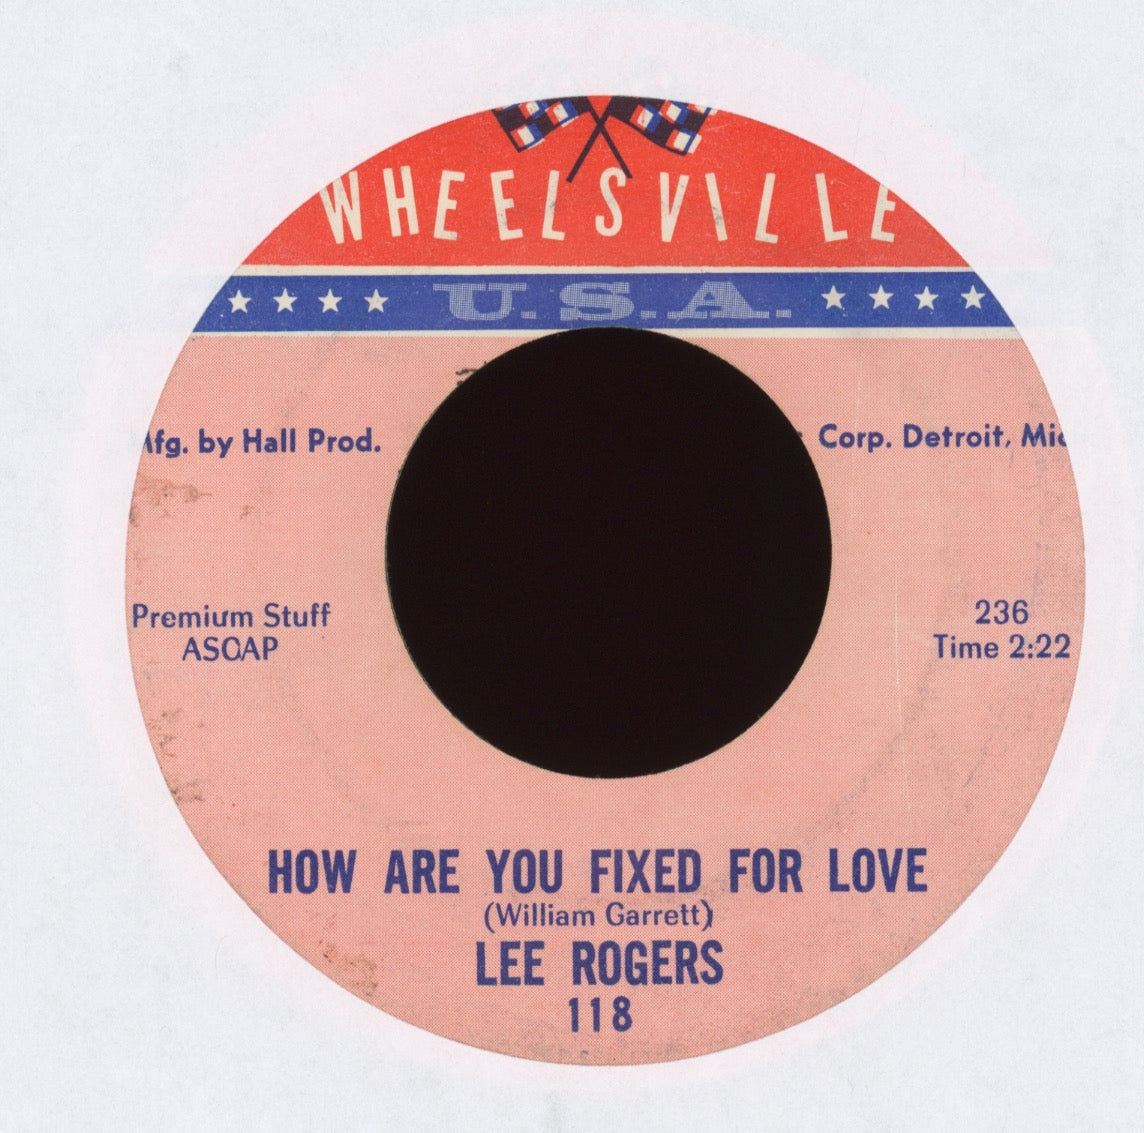 Lee Rogers - Craked Up Over You on Wheelsville Northern Soul 45